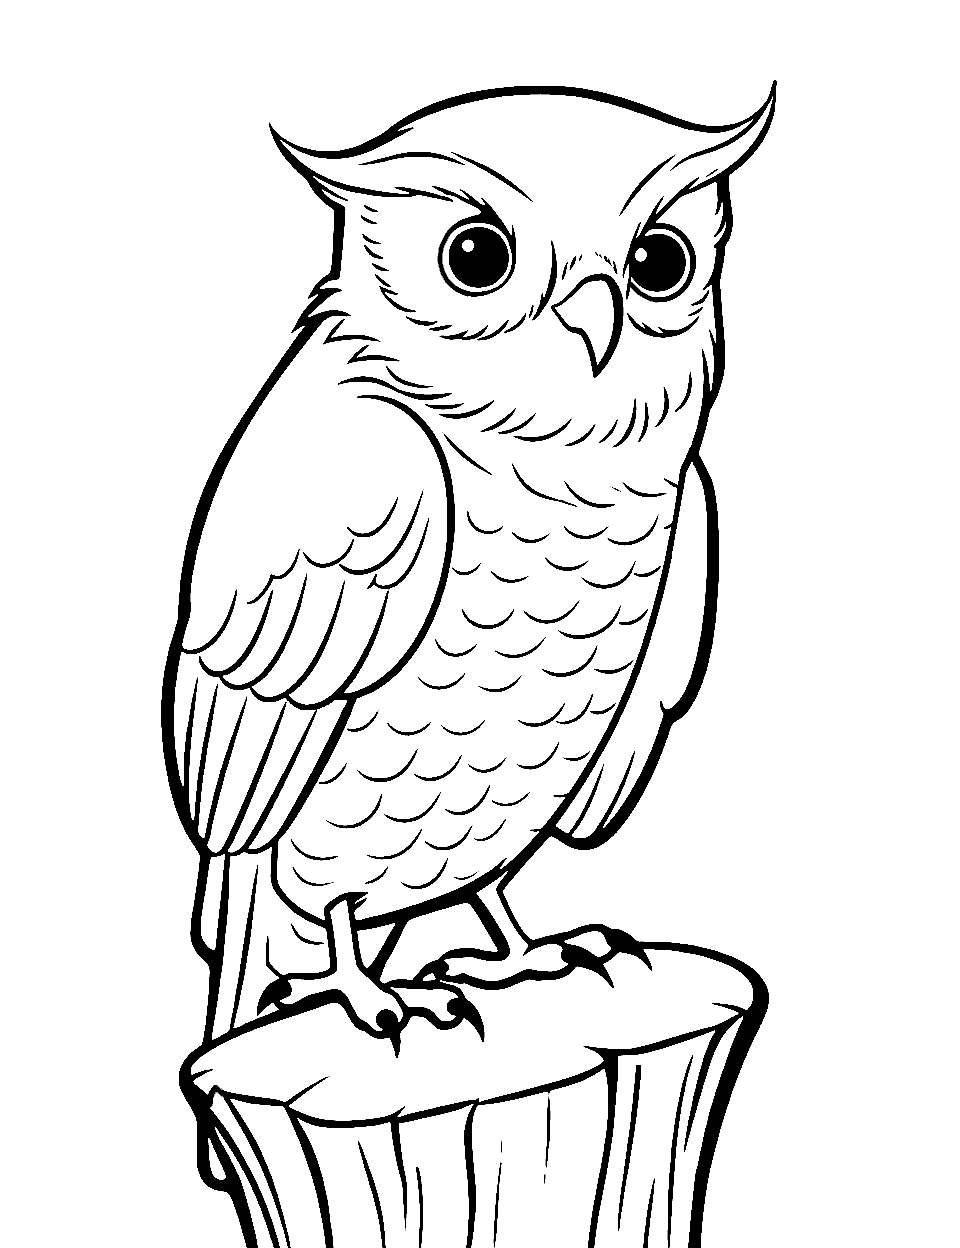 Wise Old Owl Coloring Page - An owl perched on a tree stump, with its large eyes surveying its surroundings.